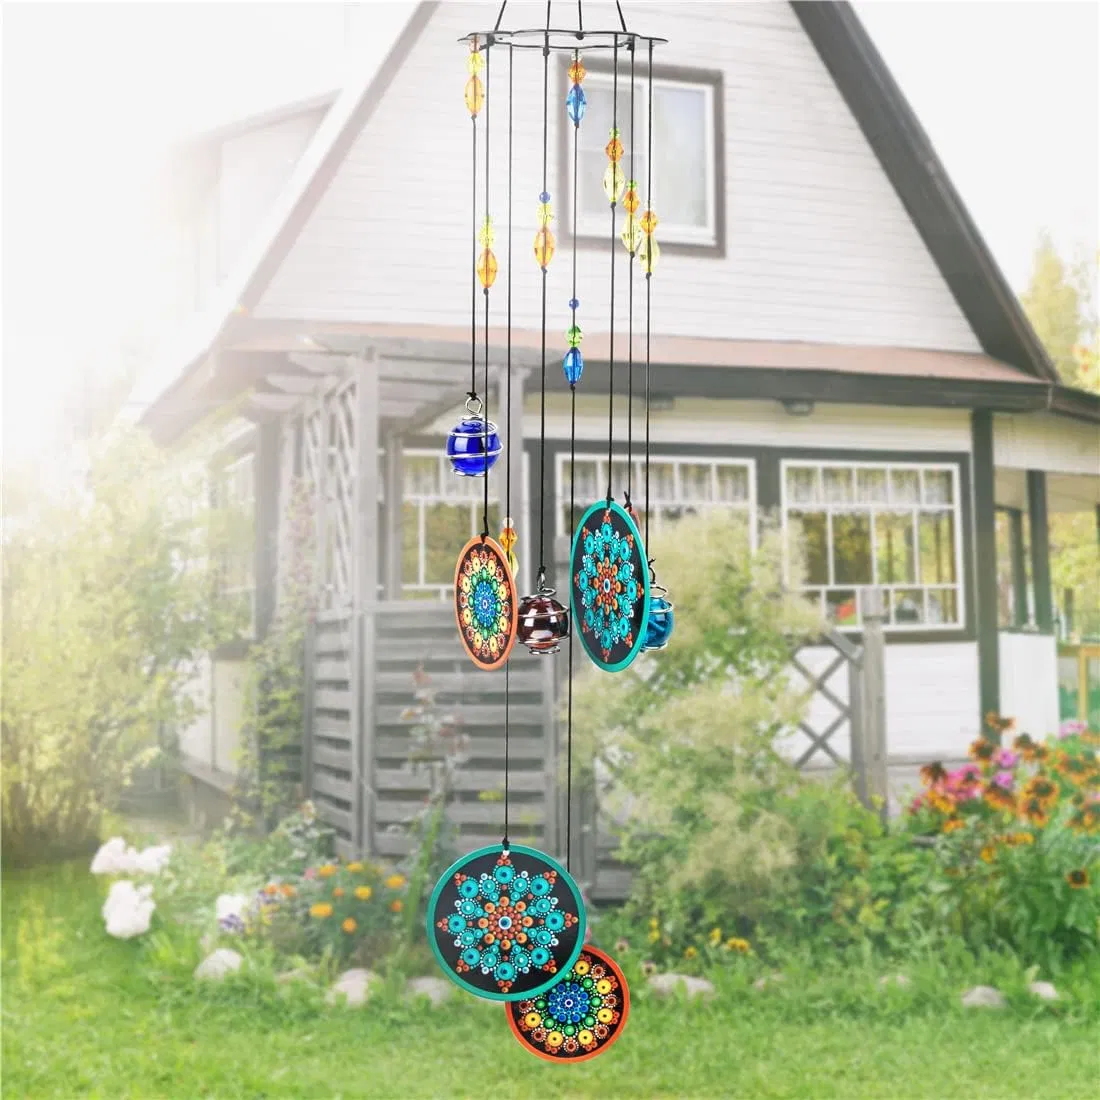 Home Decoration Gift Flower Wind Chimes Outdoors with Colorful Glass Beads Deep Tone Memorial Sympathy Window Garden Hanging Windchimes for Outside